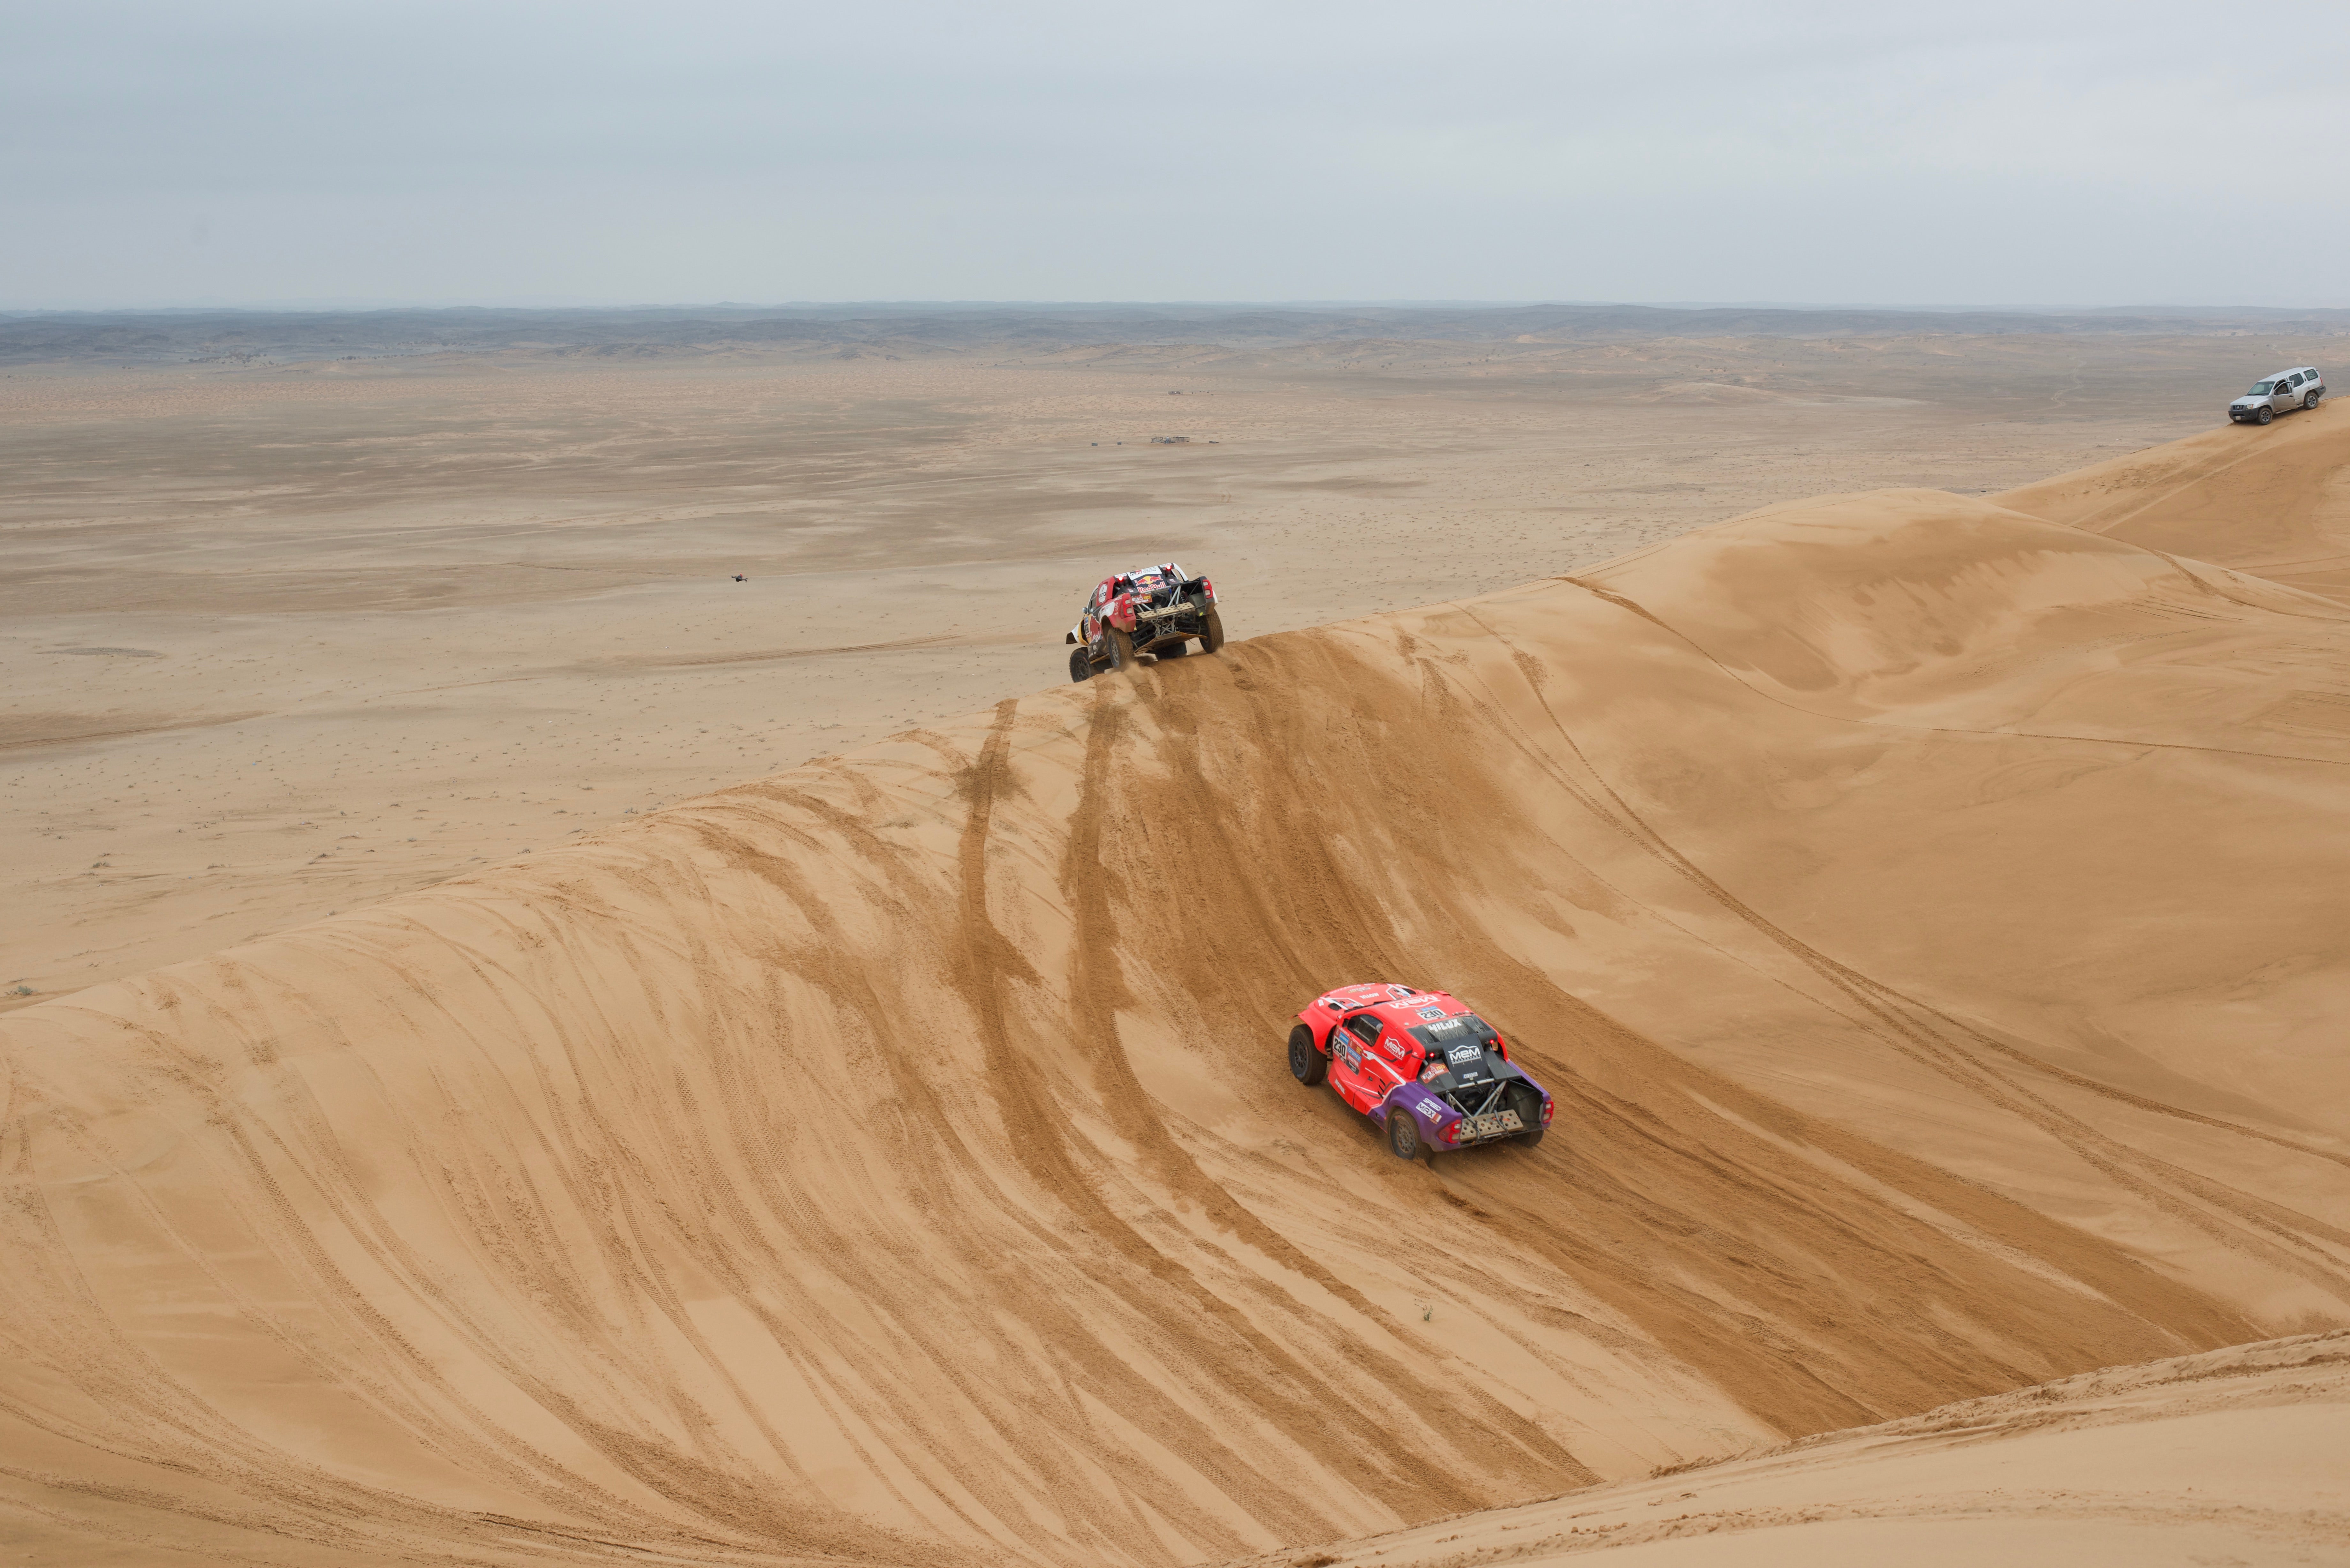 Drivers dropping out of the enormous dunes on Stage 8, an 822 km day